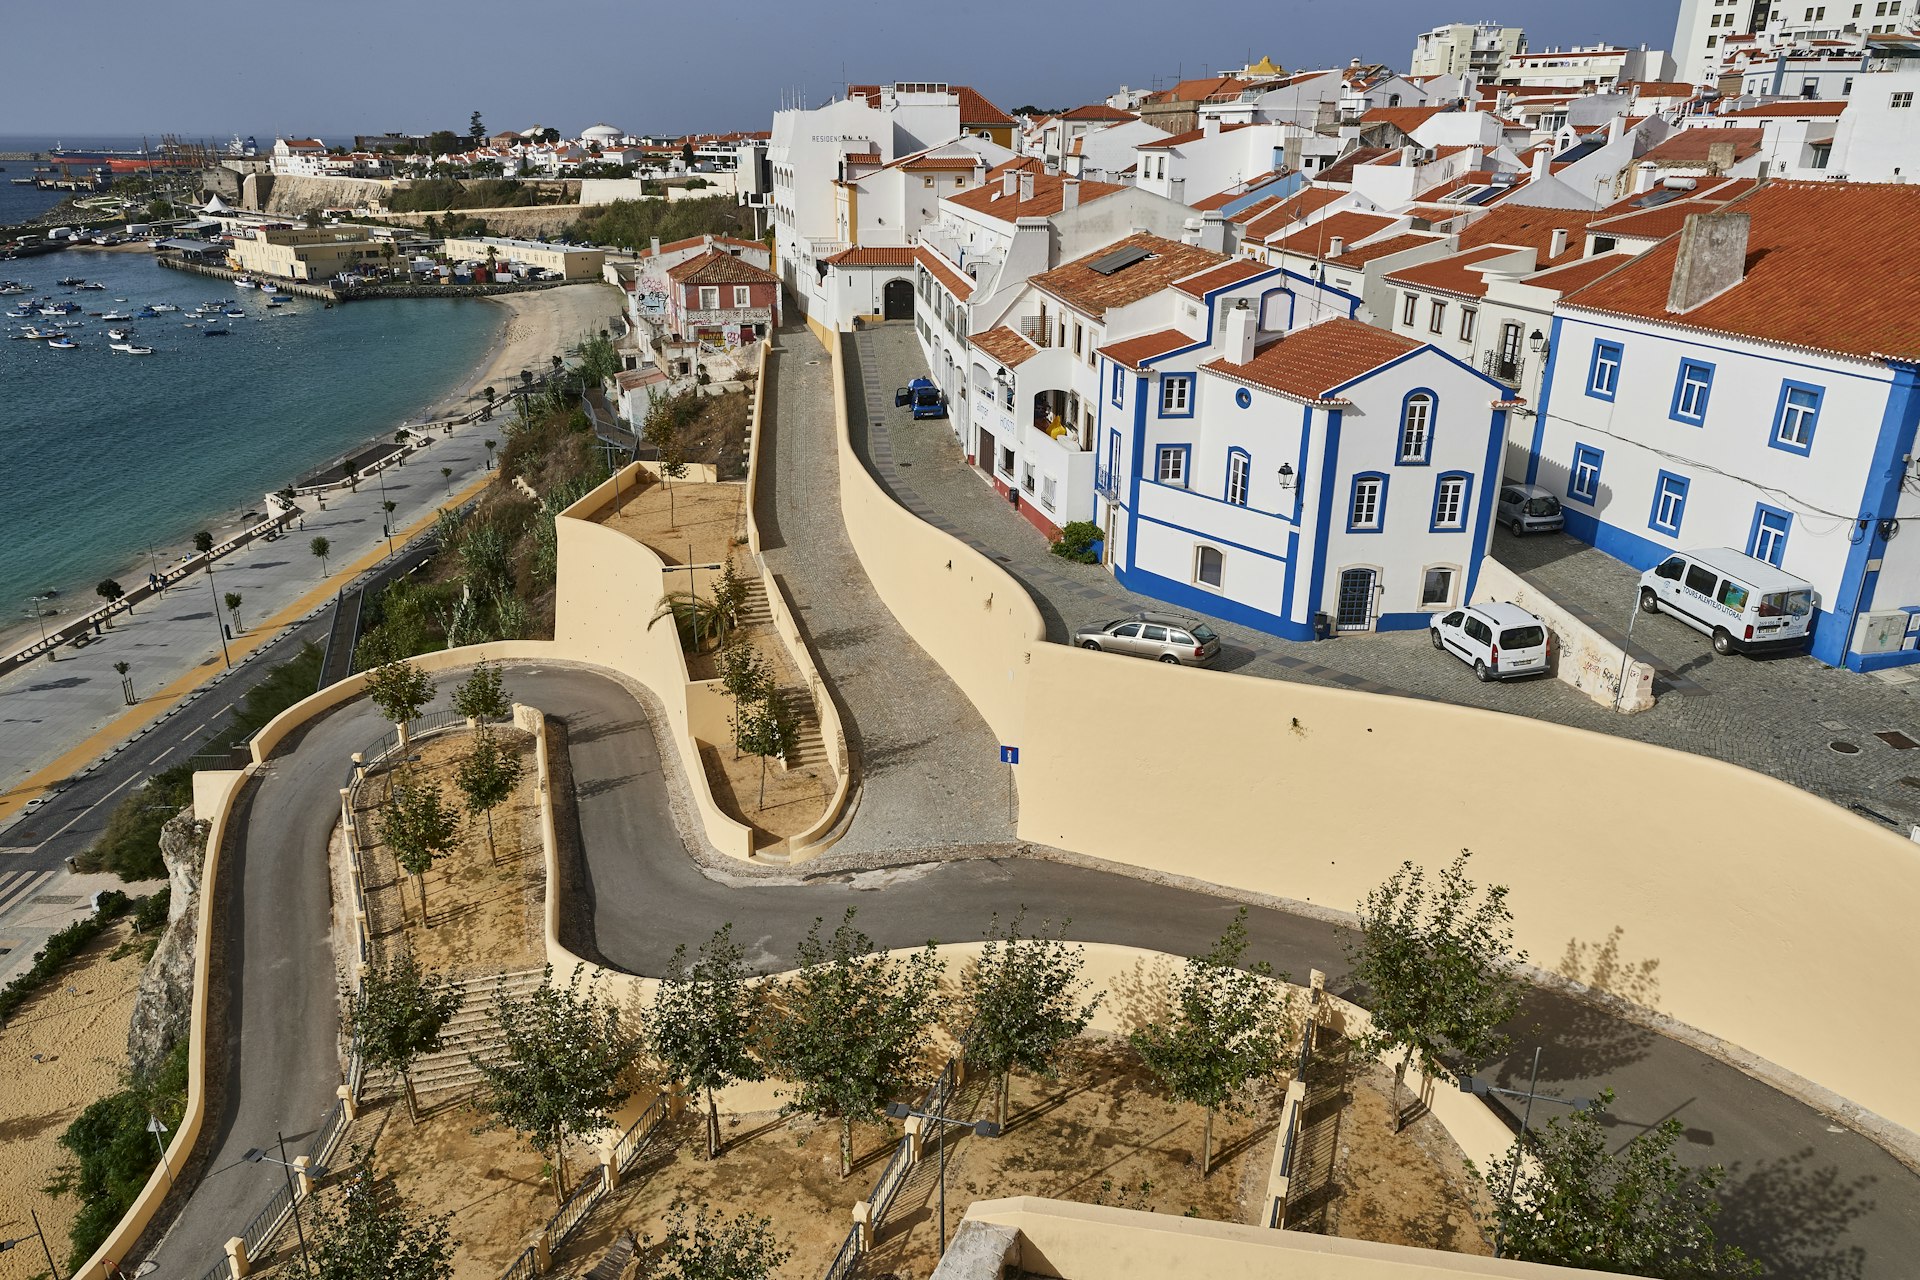 Blue and white houses at the top of winding hill in Sines village in Alentejo, Portugal